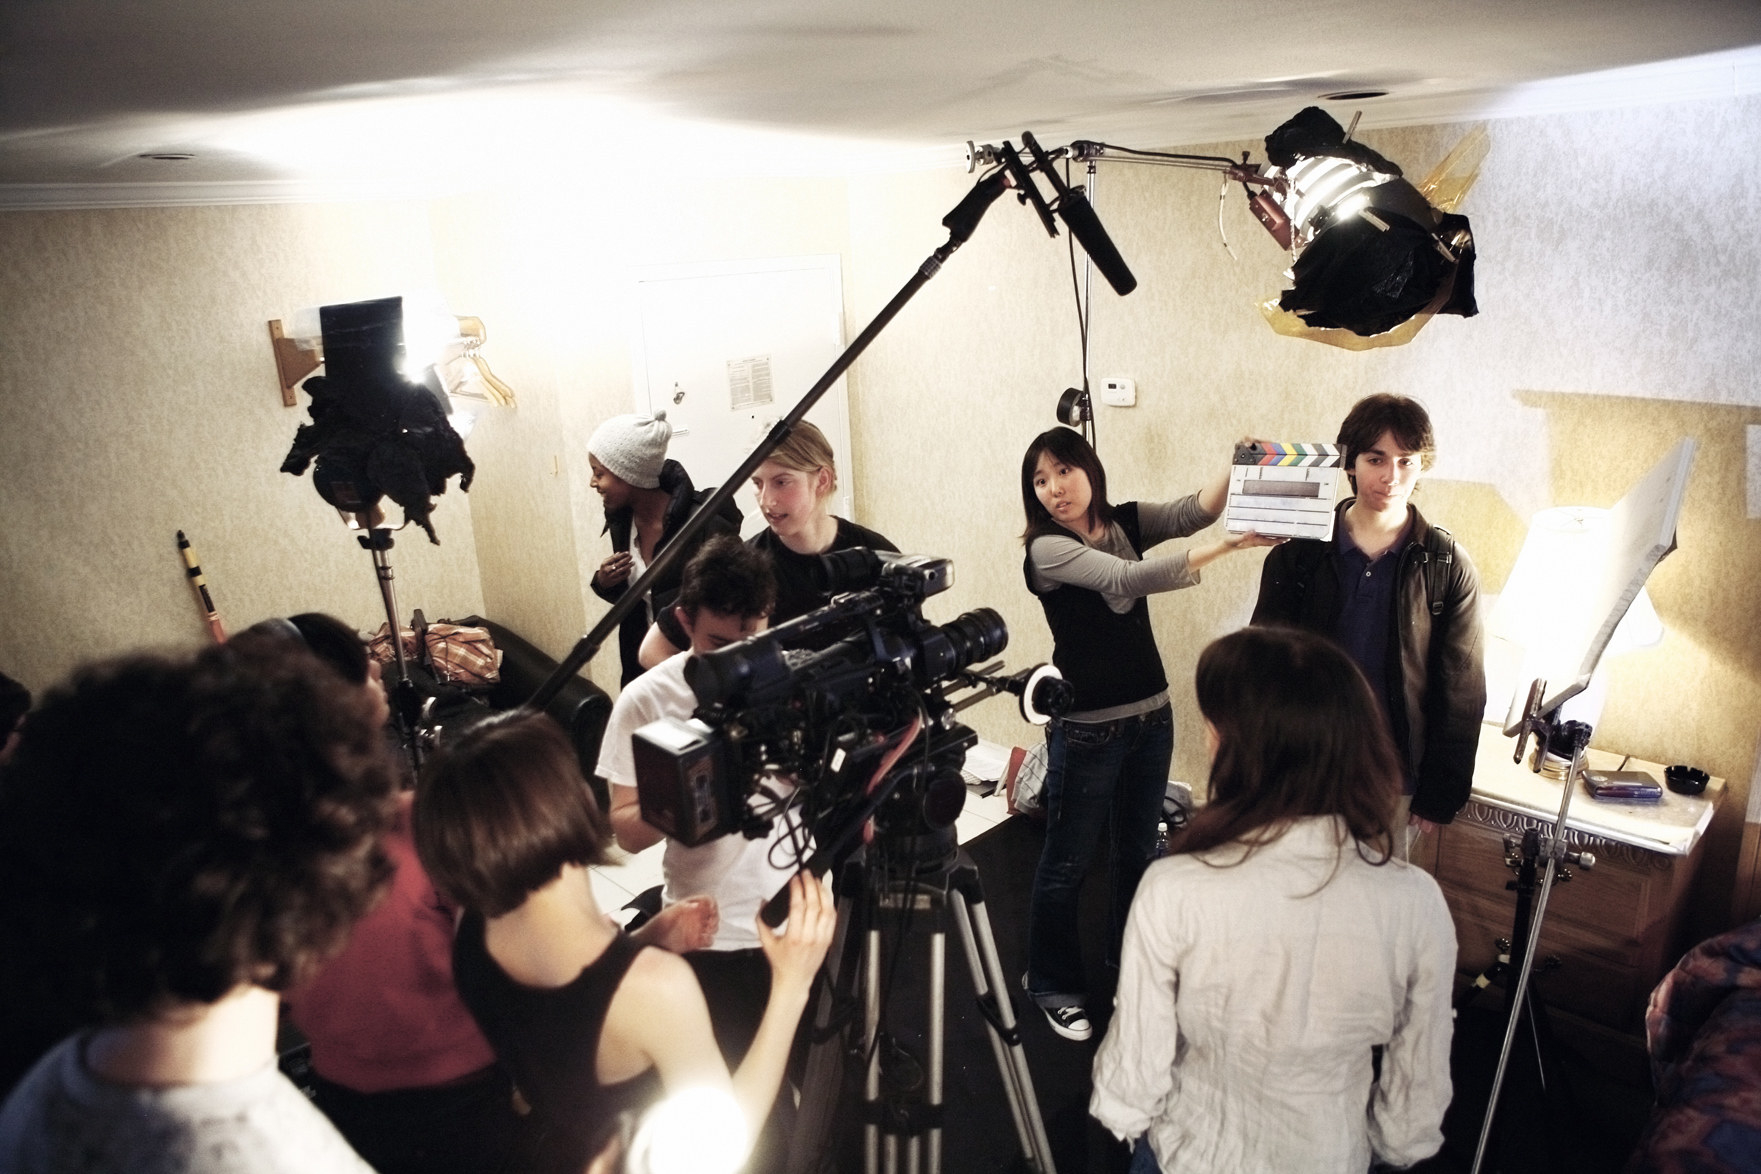 cameras and crew inside a small room